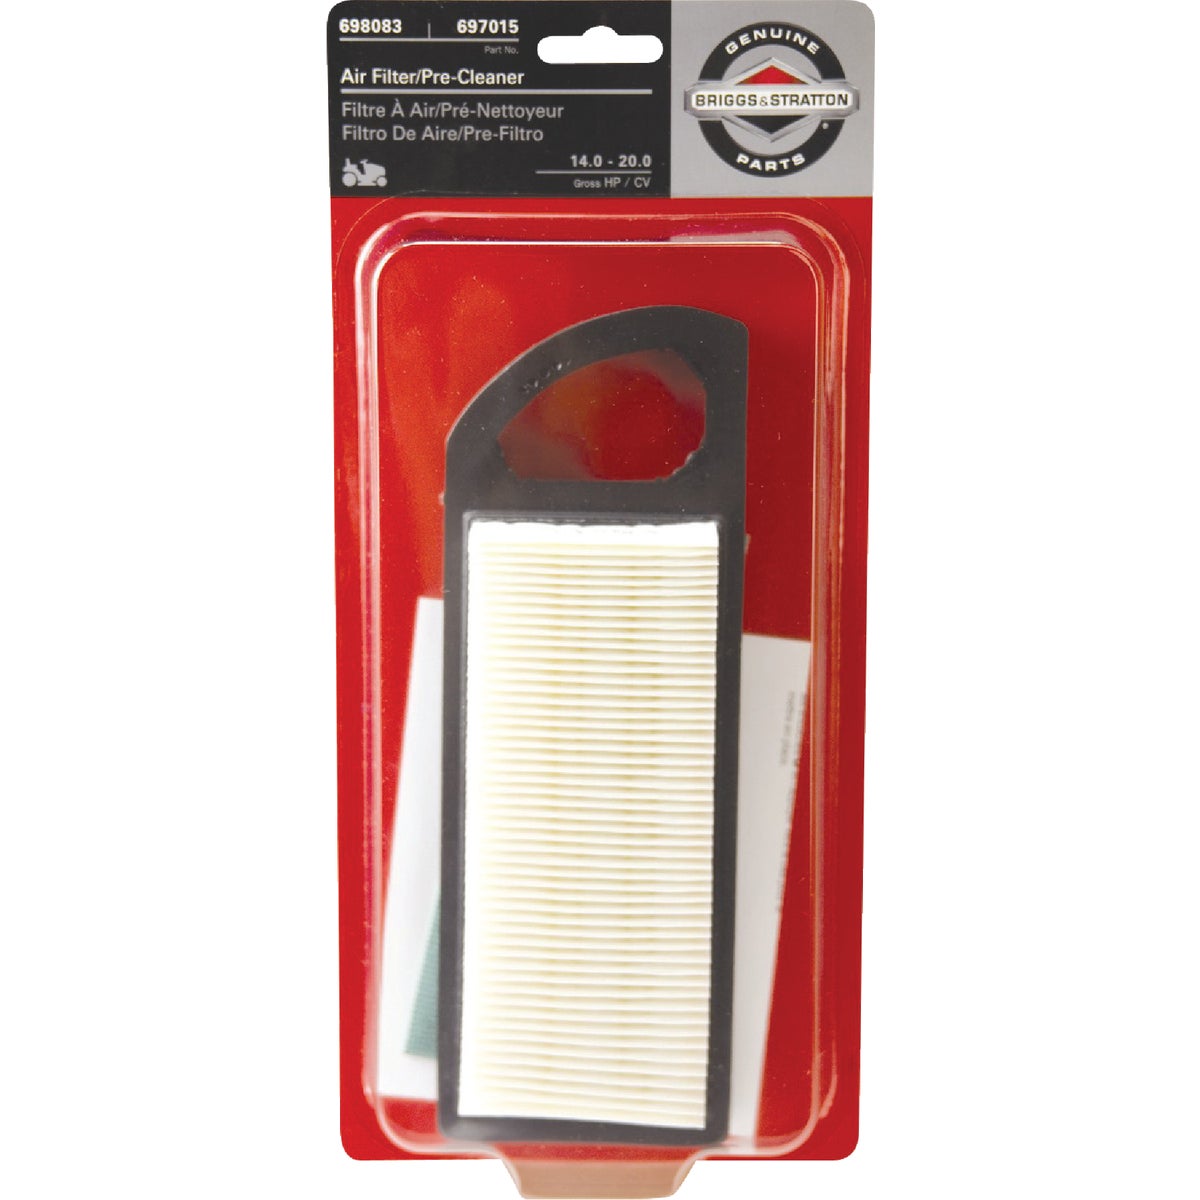 Item 749237, Air filter with pre-cleaner for use on 14 to 20 HP Vanguard OHV V-Twin, AVS